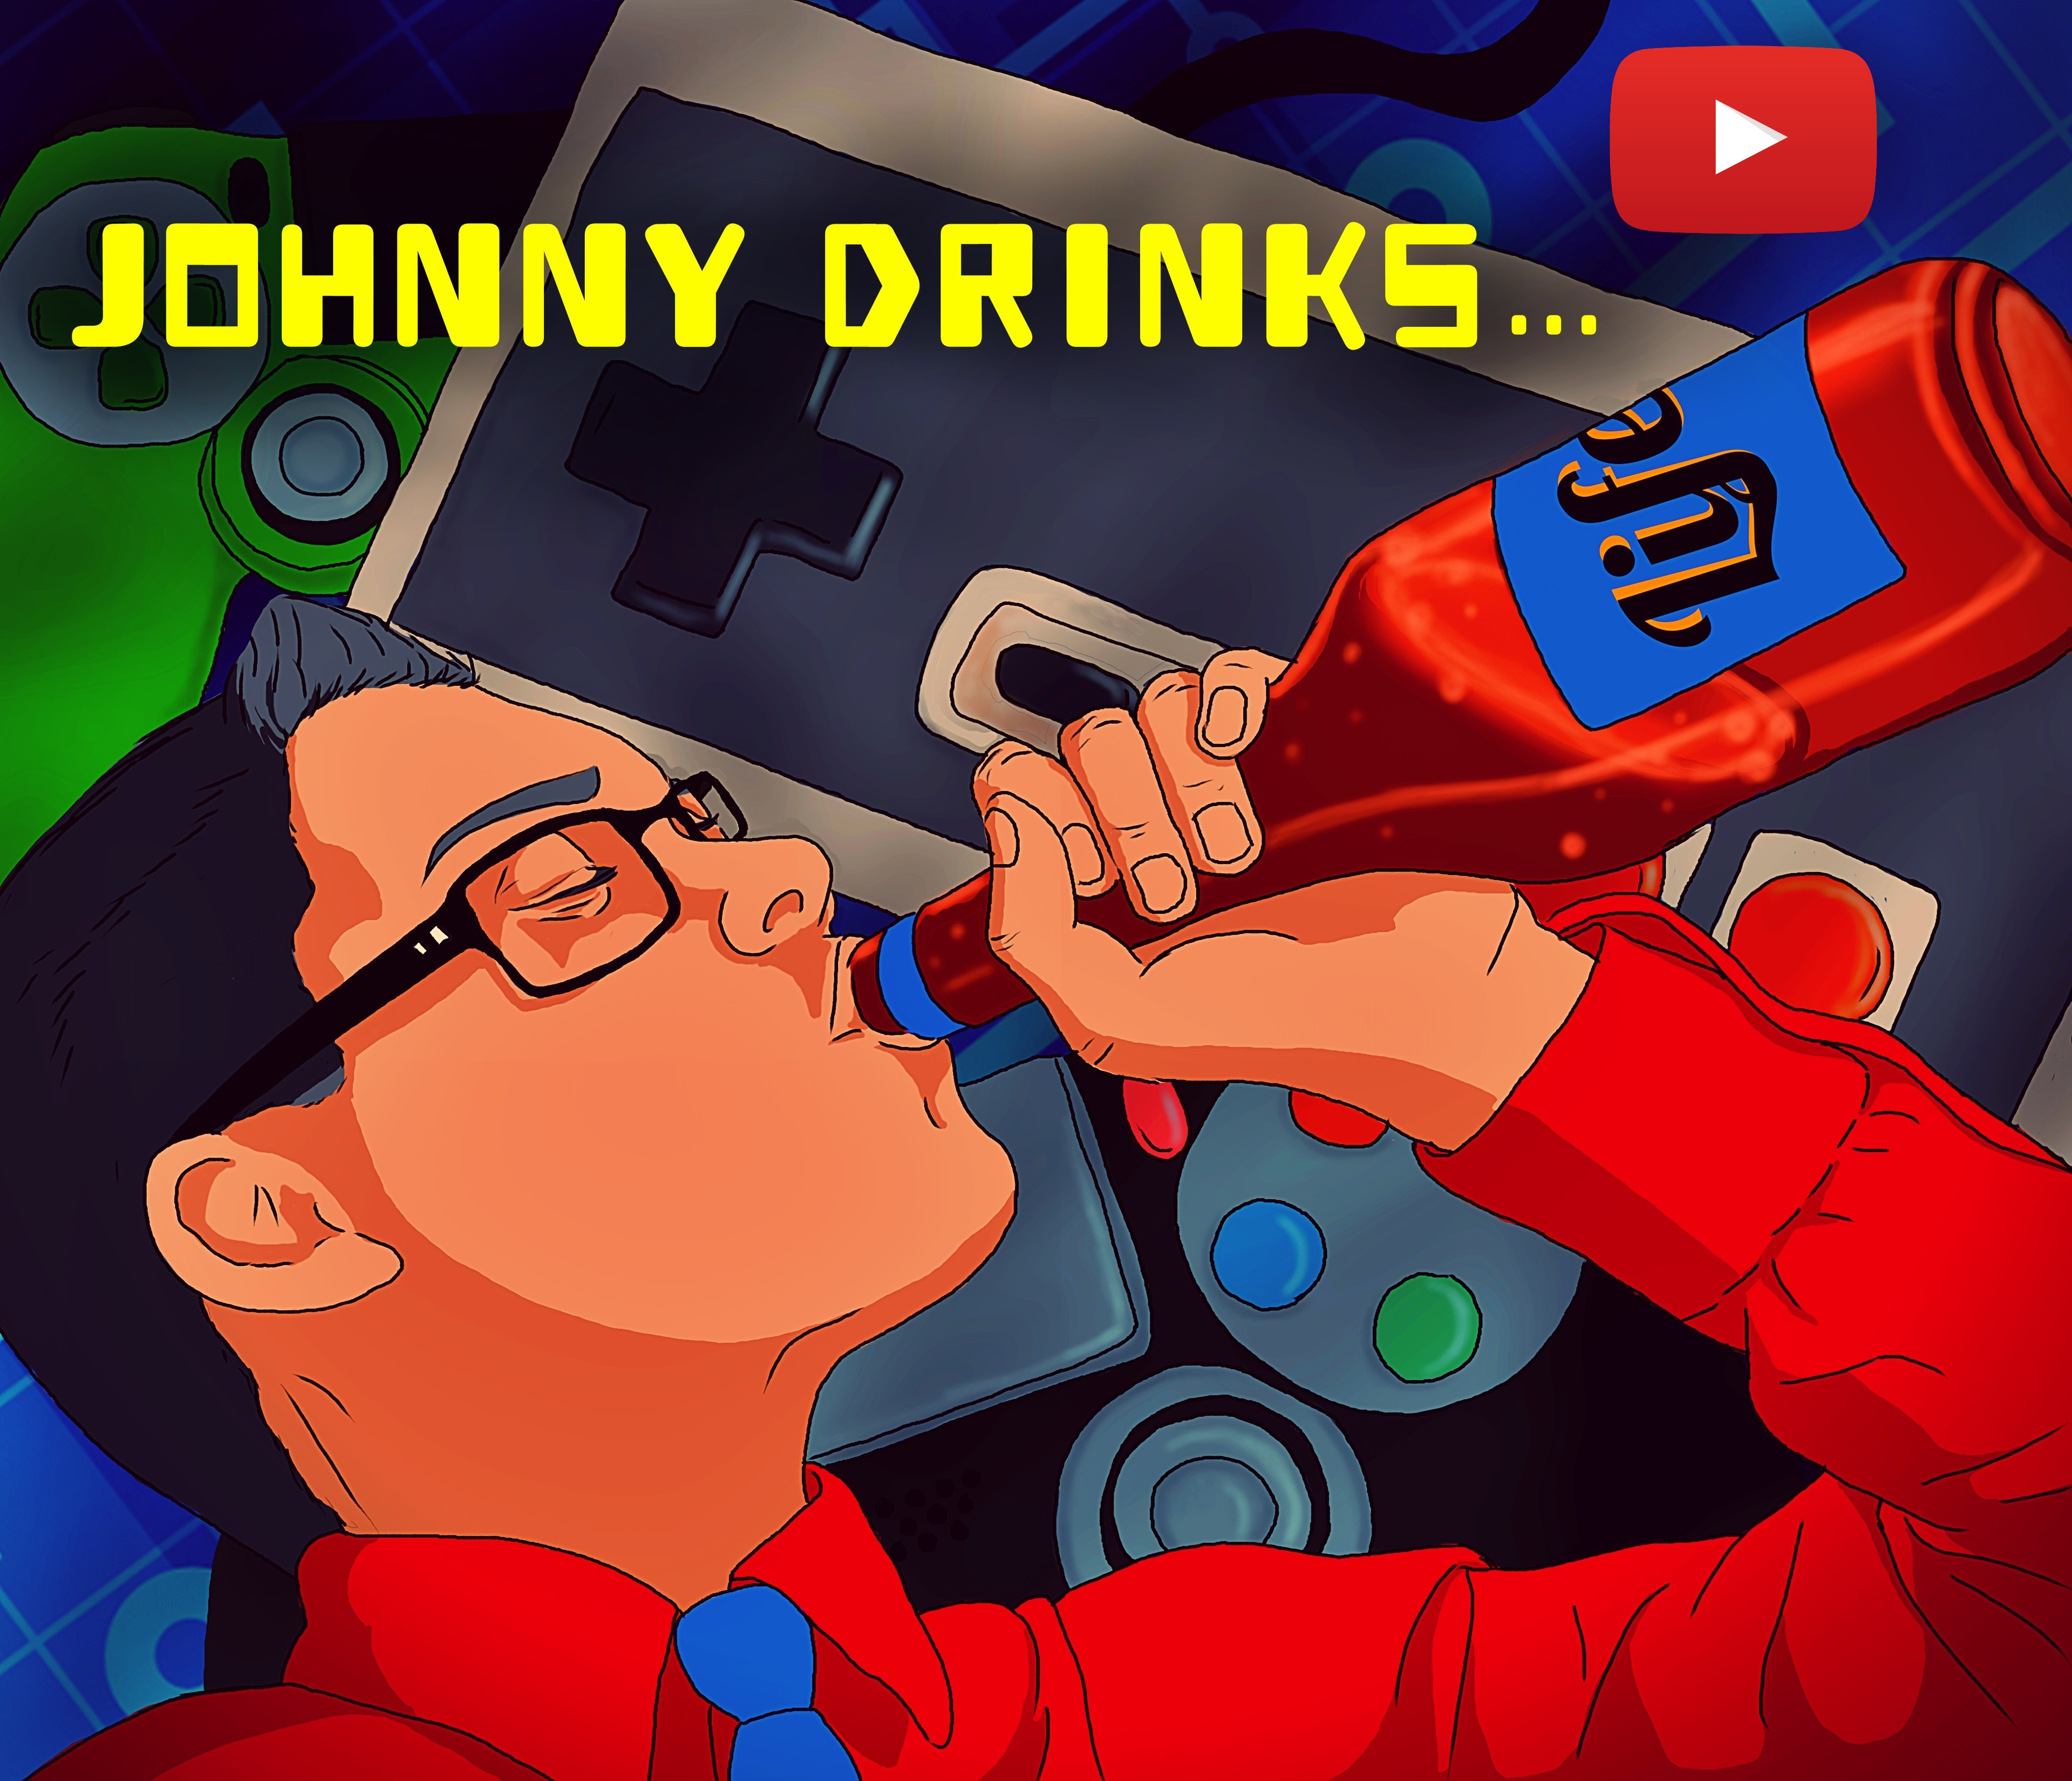 Digital illustration of my friend Johnny, made for his Youtube channel.